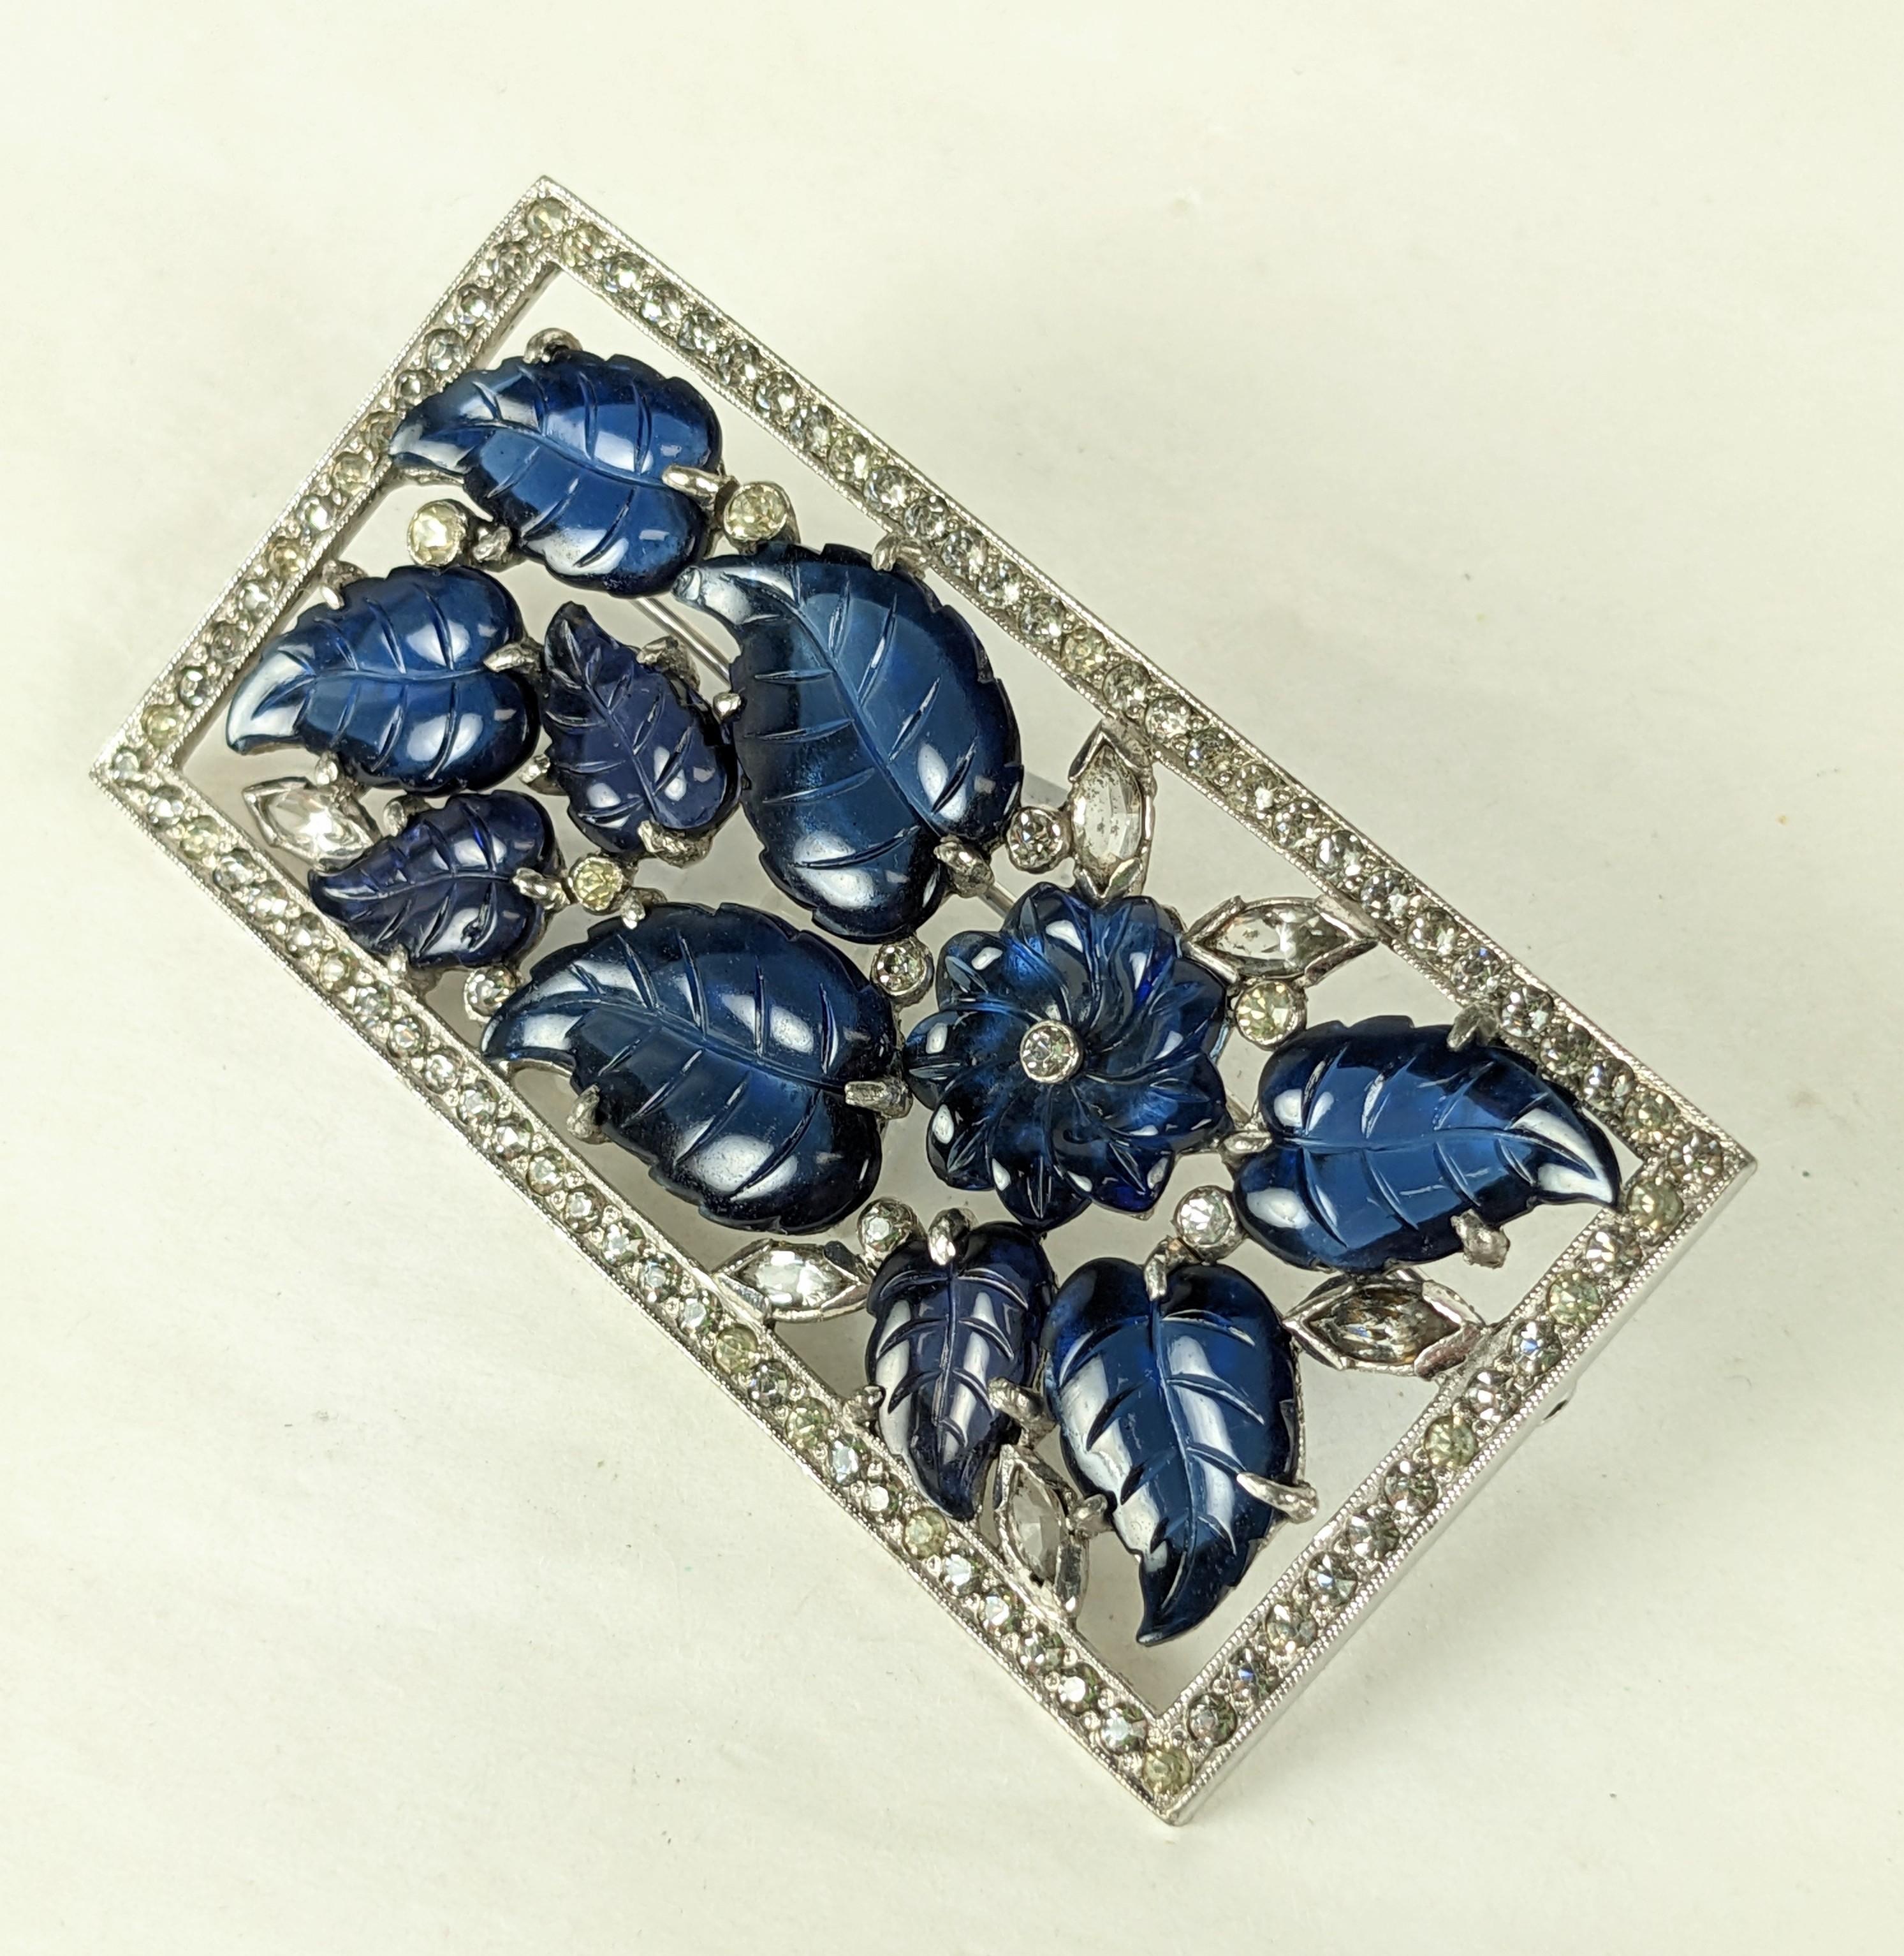 Rare Dujay Art Deco Fruit Salad Brooch from the 1930's, unsigned. Dujay had the highest quality manufacture of the period, in rhodium and pate de verre molded leaves in a pave frame. 2..65